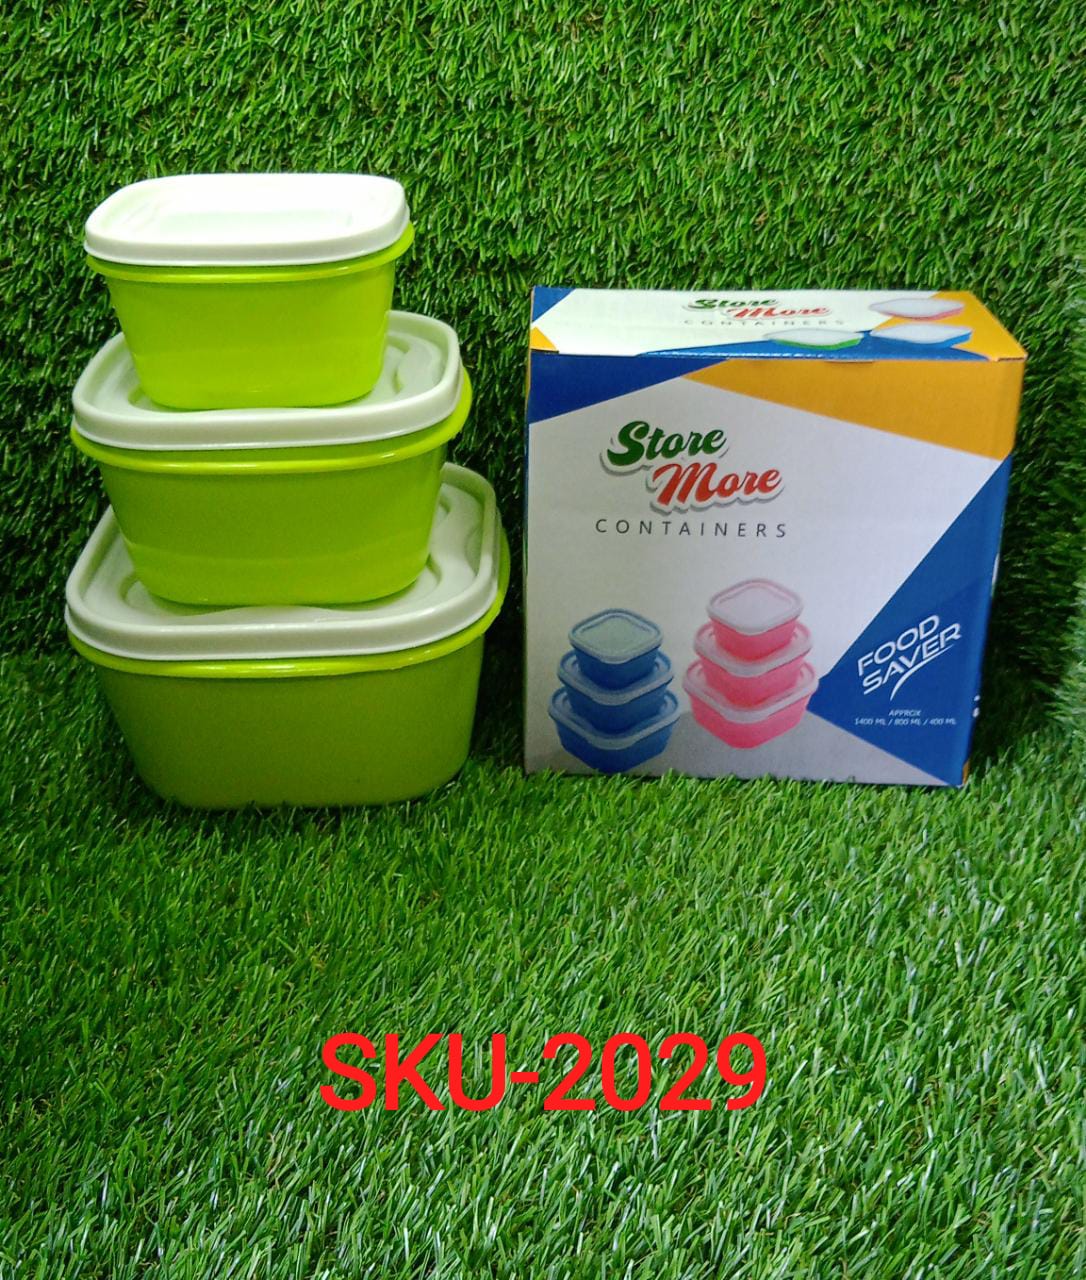 2029 3 Pc Multi-Purpose Container used in all kinds of household and official purposes for storing food and stuffs etc. 